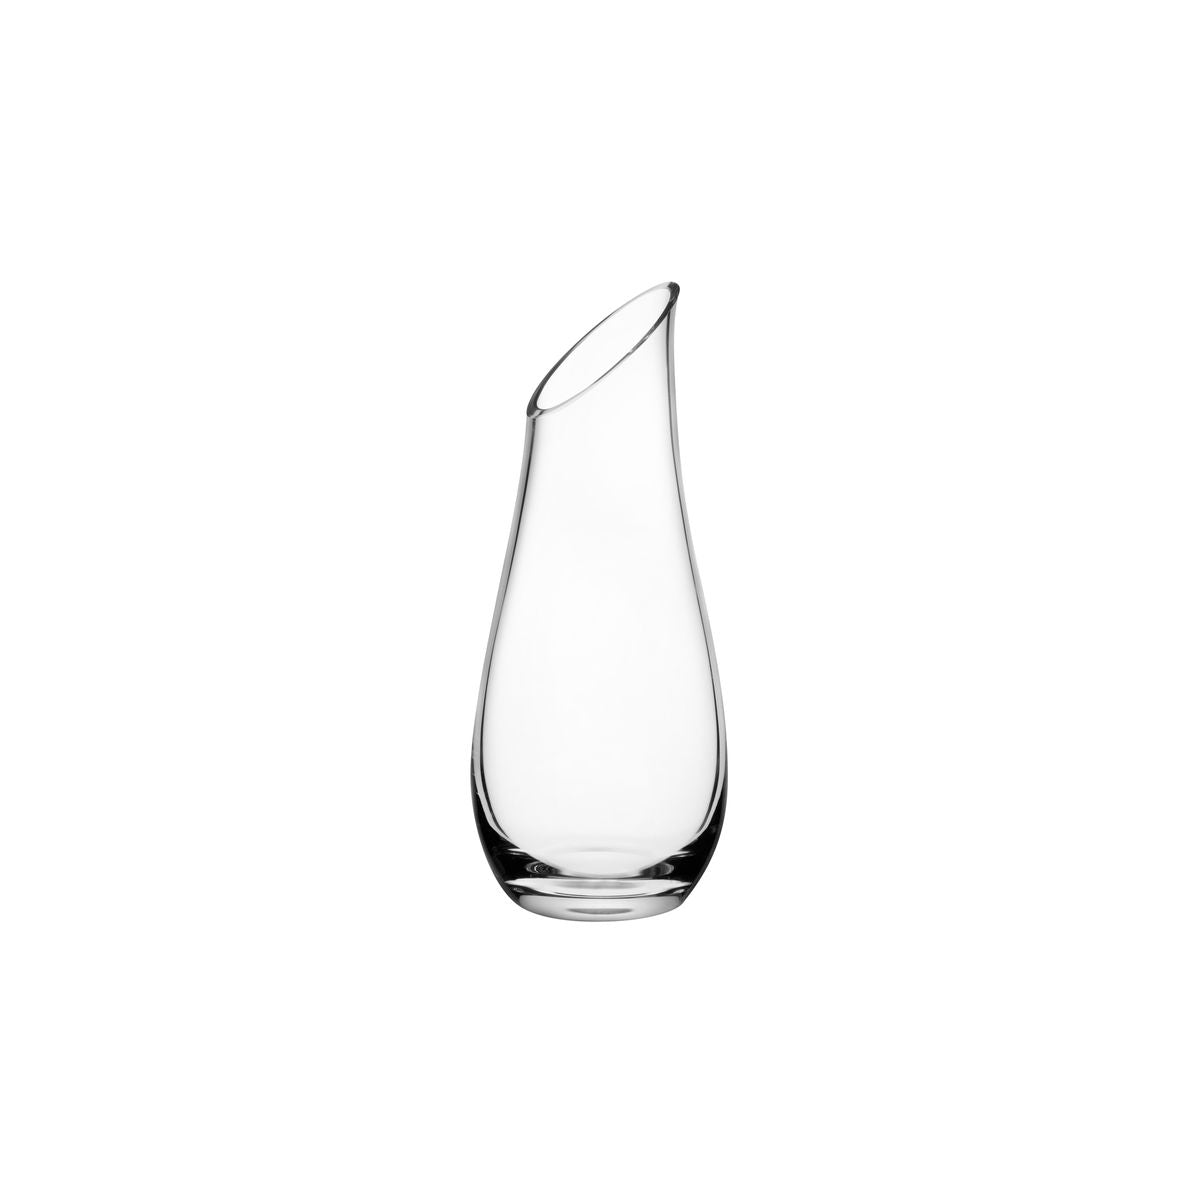 Carafe - 375ml, Pure from Nude. made out of Glass and sold in boxes of 12. Hospitality quality at wholesale price with The Flying Fork! 